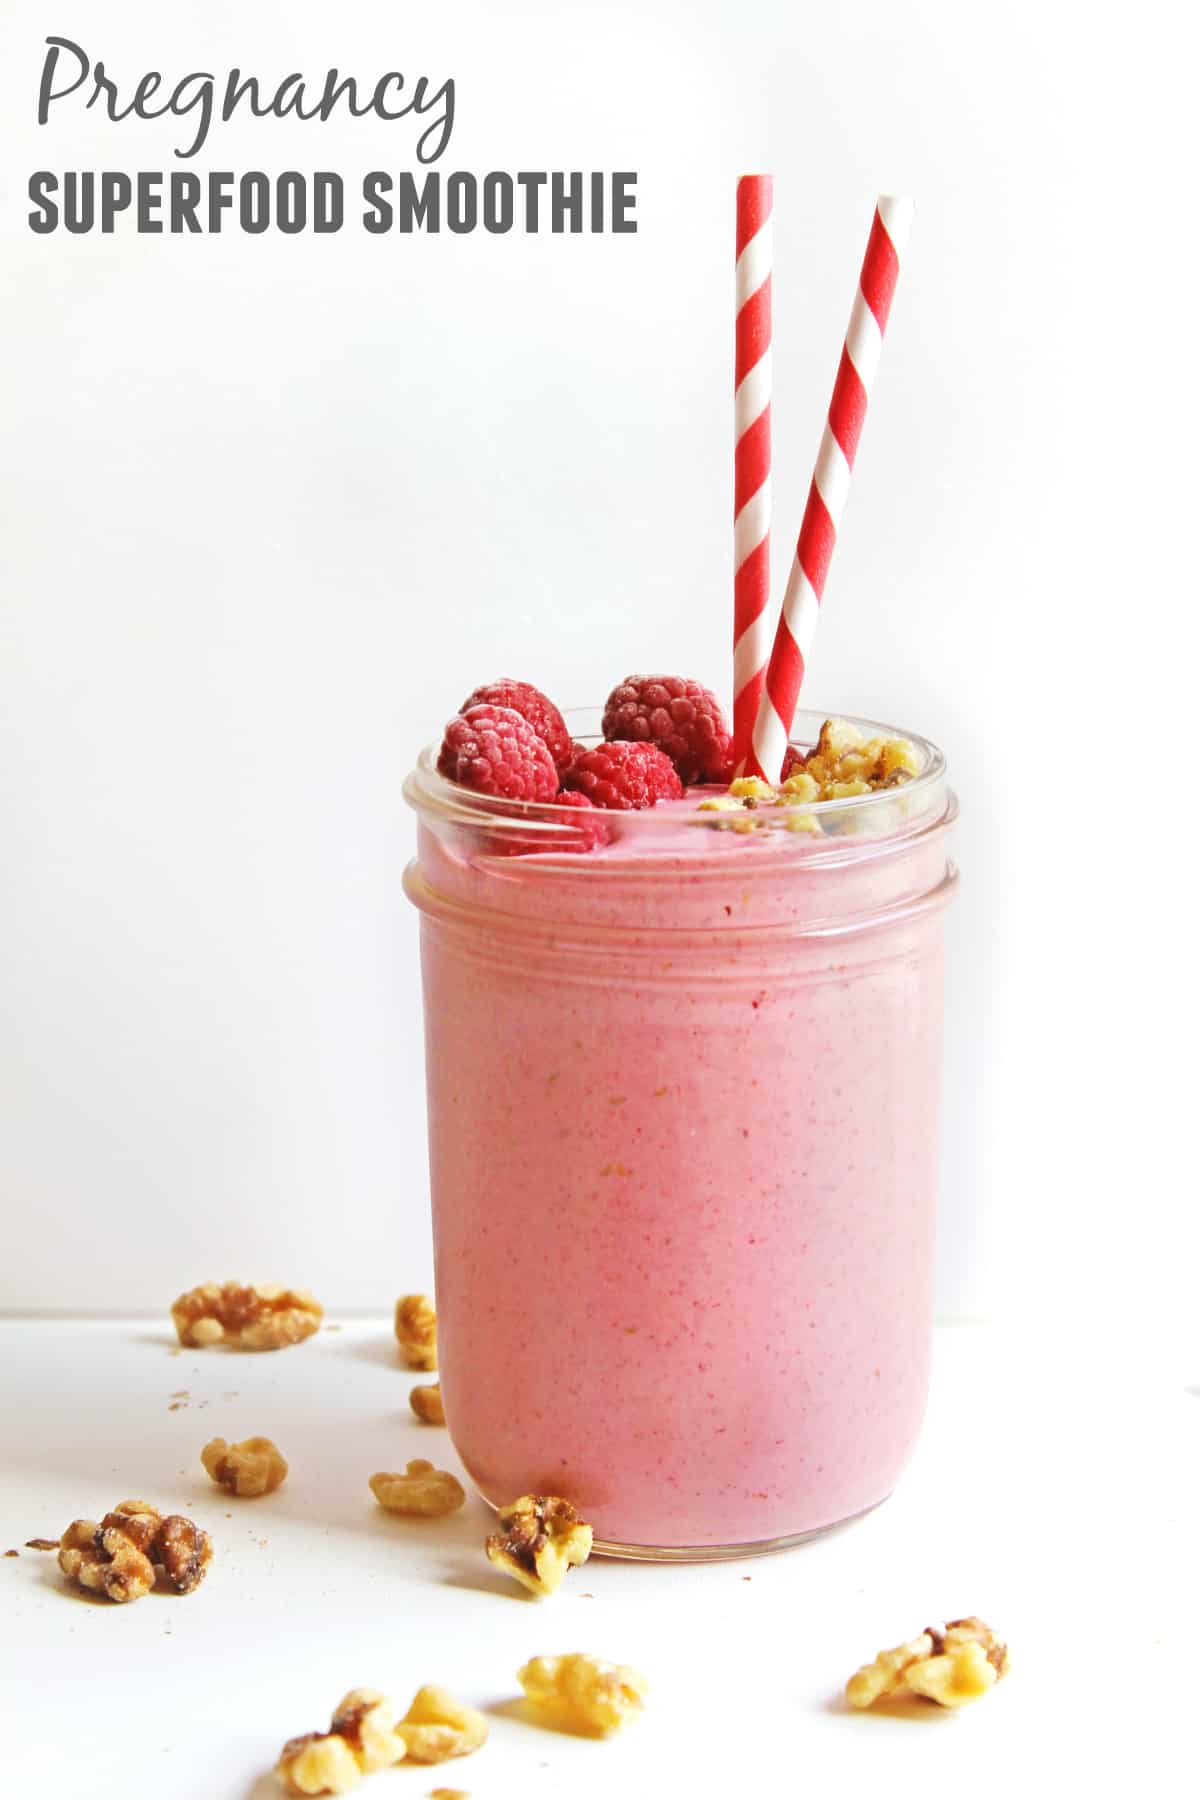 Stay healthy and happy during your pregnancy with this pregnancy superfood smoothie recipe! Plain yogurt, raspberries, bananas, and walnuts are loaded with protein, probiotics, fiber, omega fatty acids, and vitamins. So good!